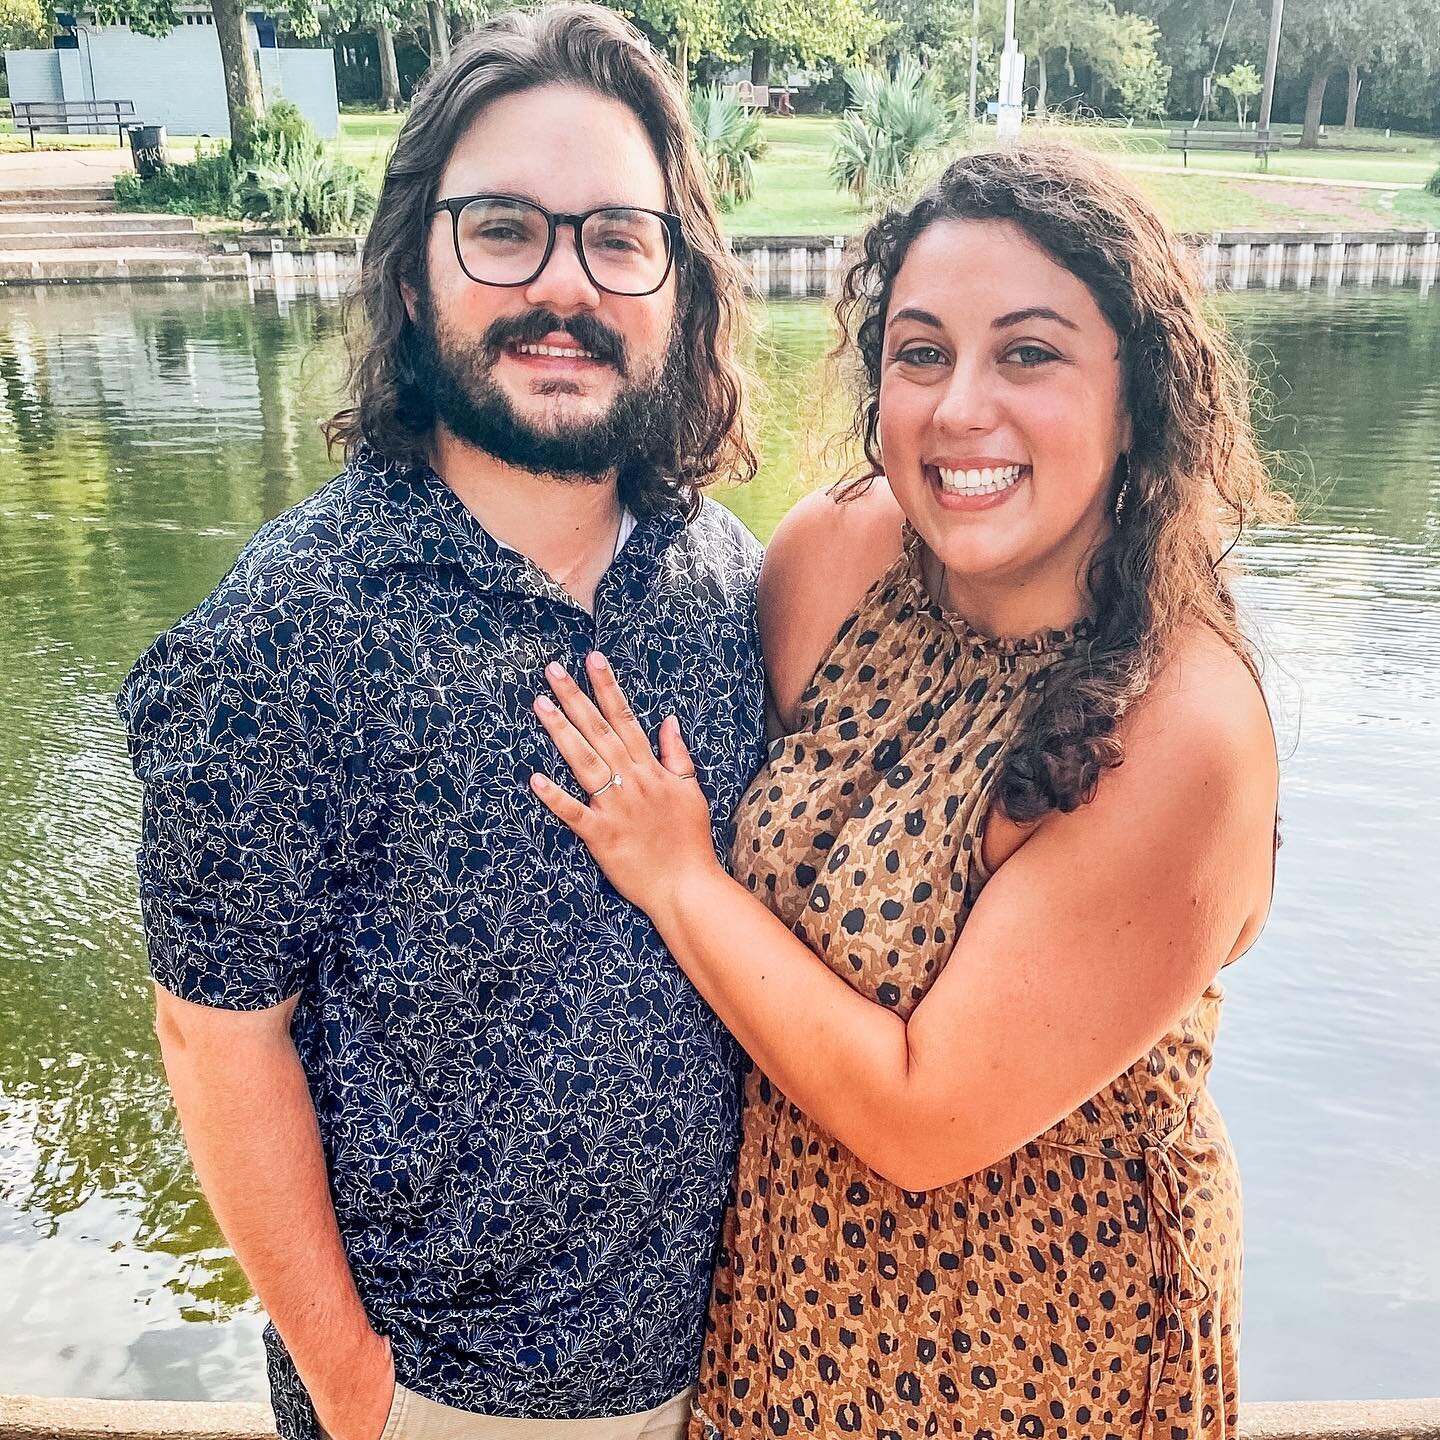 Huge congratulations to Brother Cody Roy (&Iota;&Omega; 907) and Sarah Haik on their engagement! Cody served as our chapter President and Treasurer during his time as an active brother. Sarah is a member of our Crescent Court and was always willing t